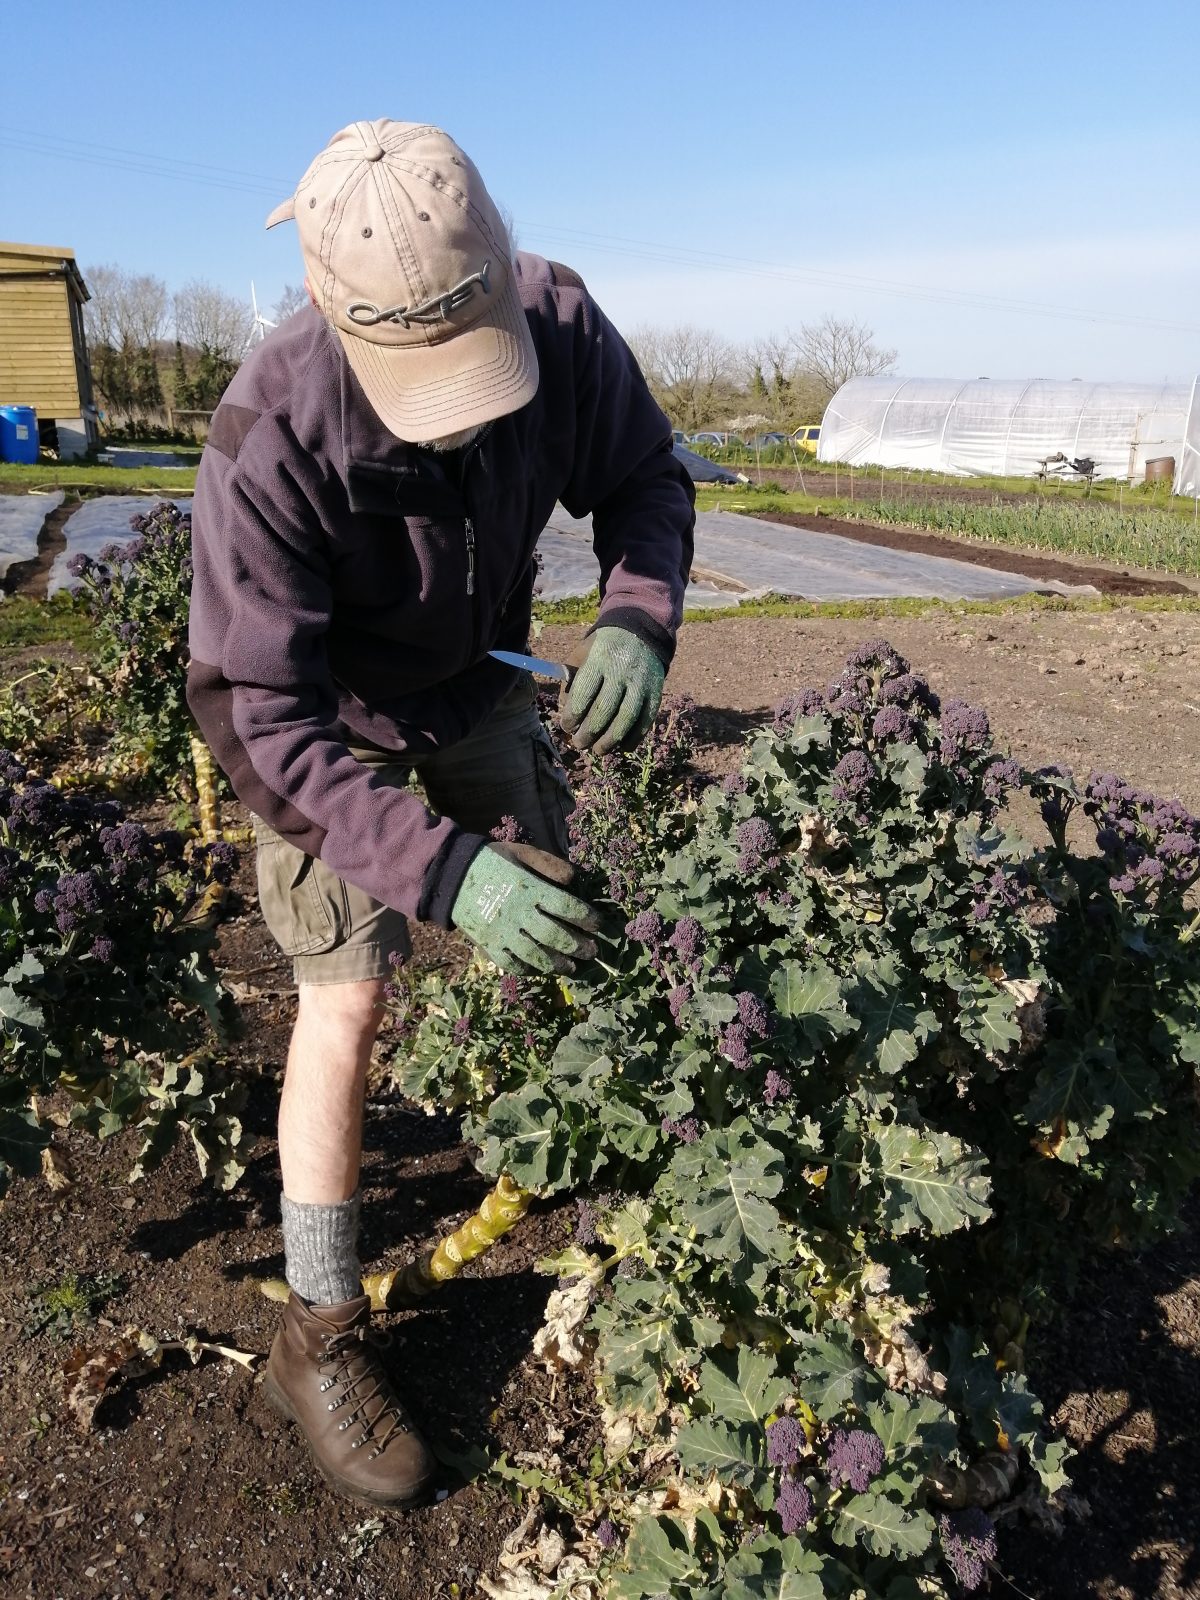 harvesting-purple-sprouting-broccoli-camelcsa-160421